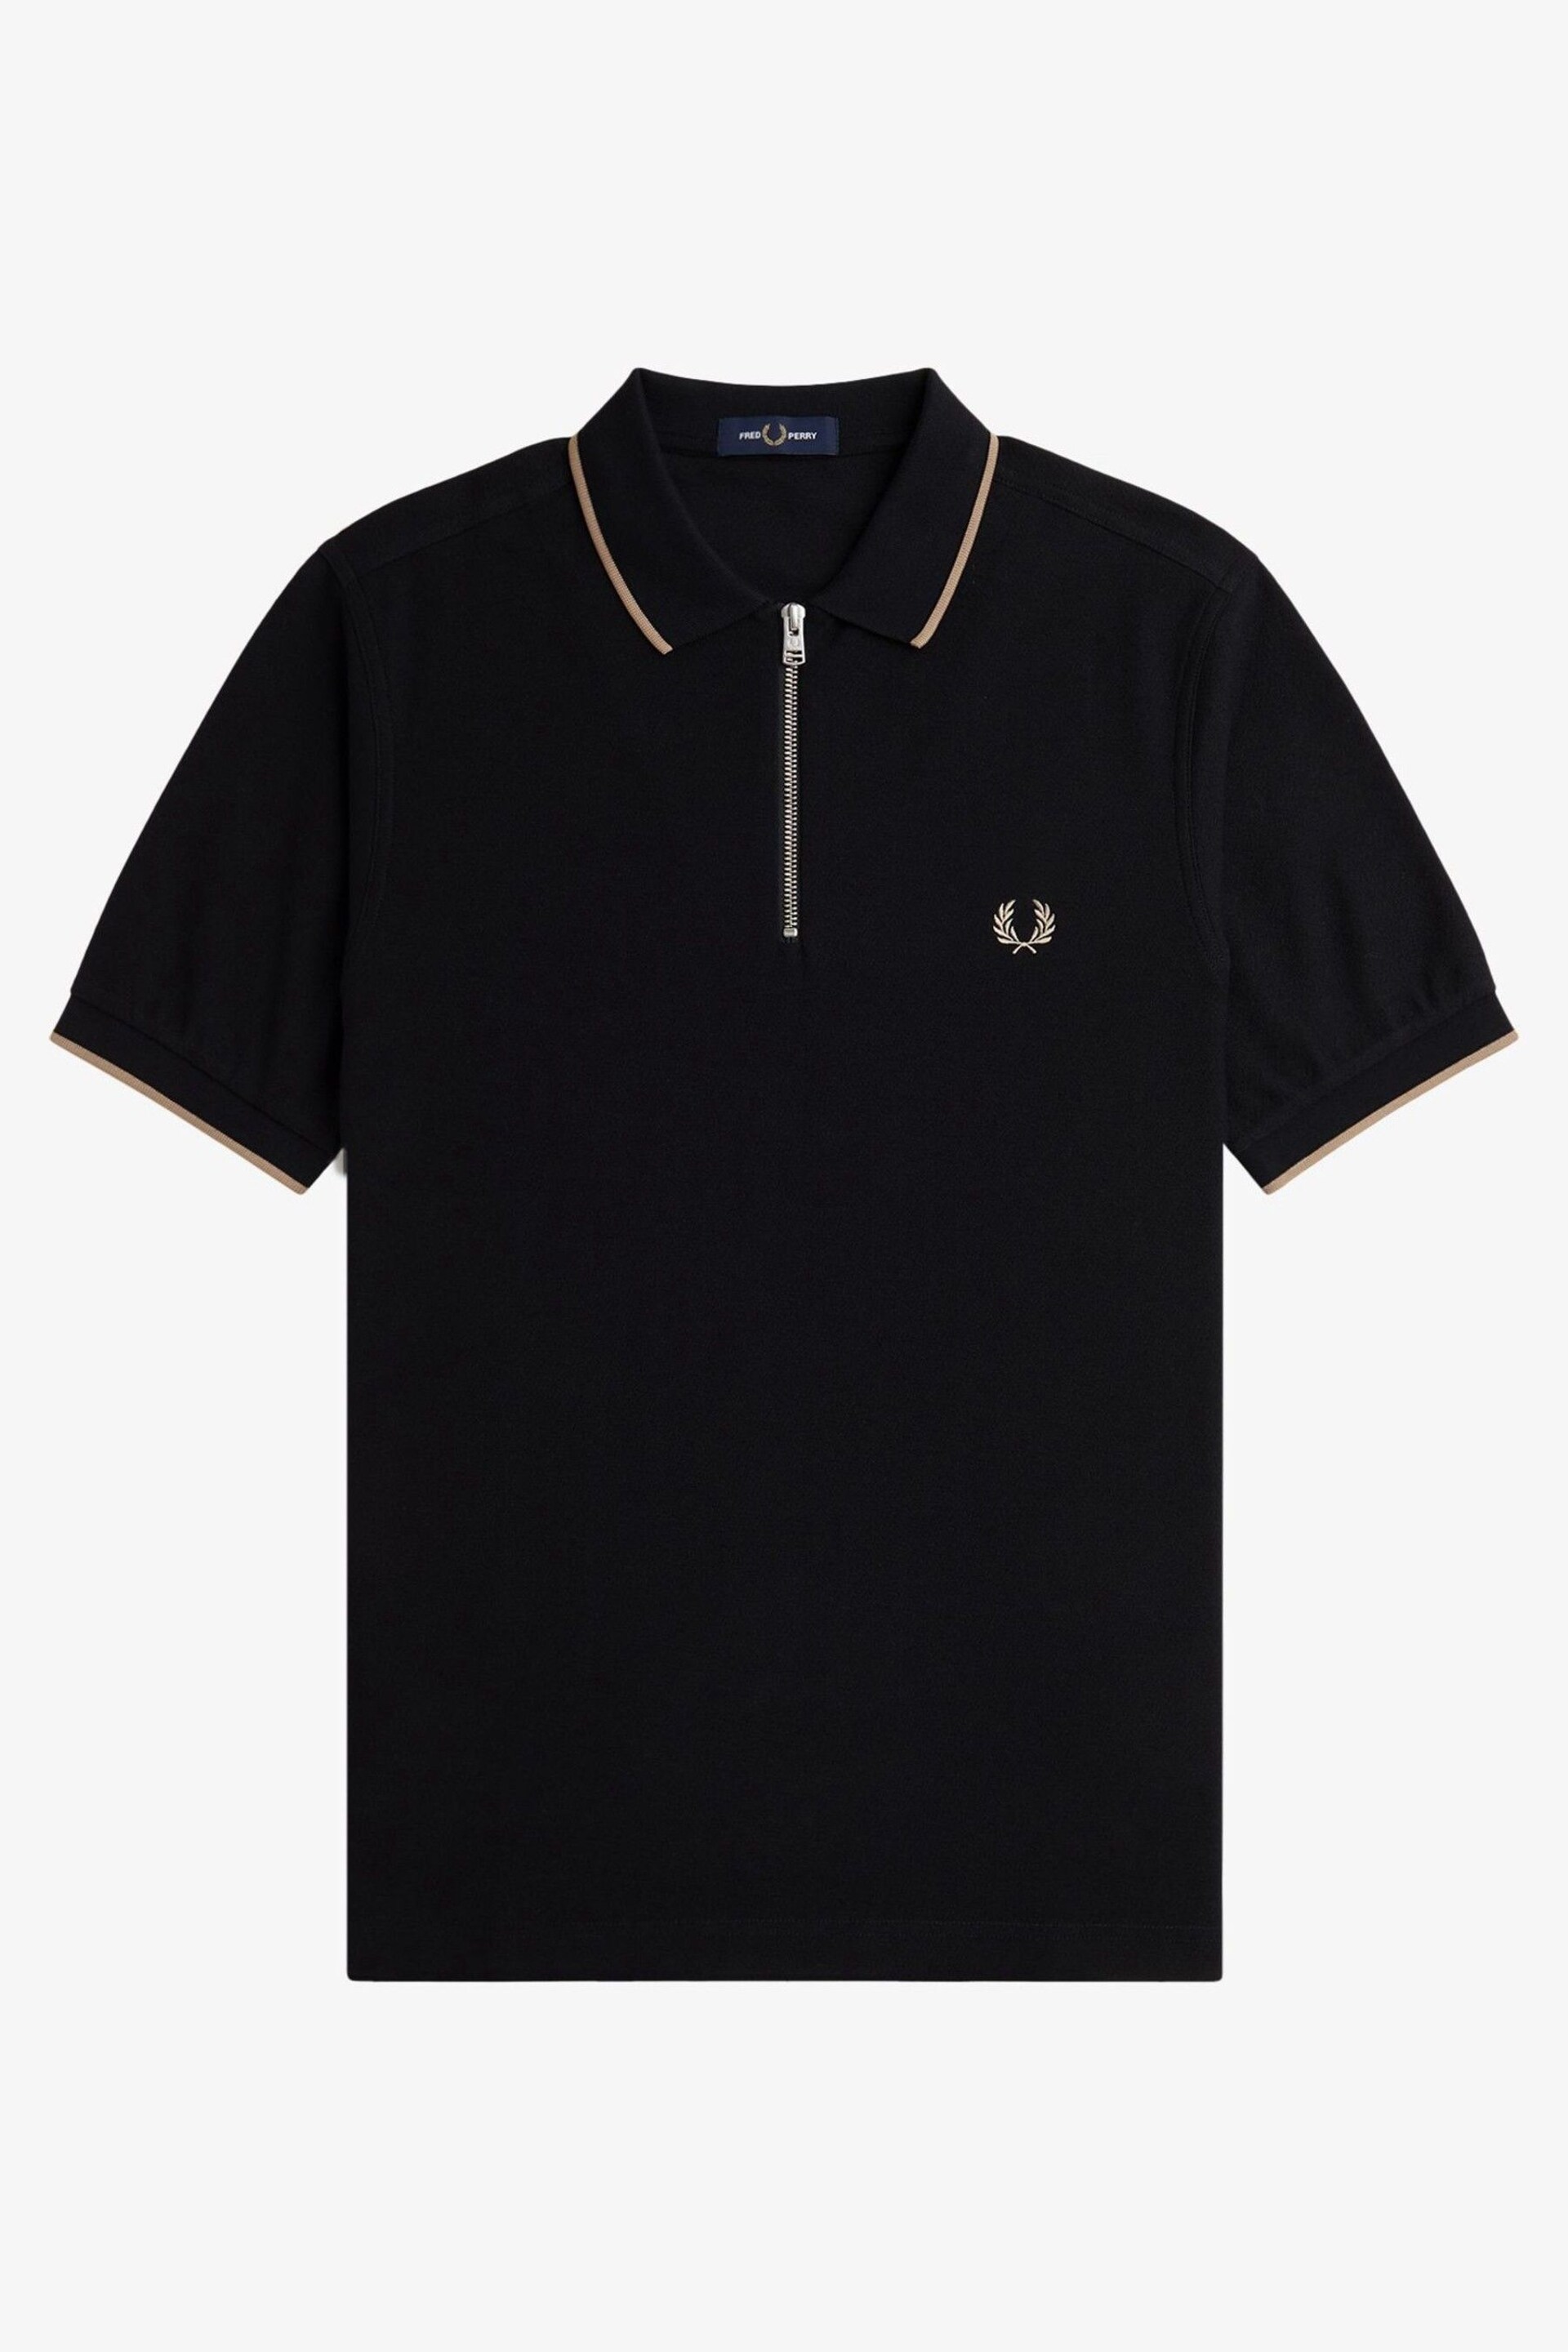 Fred Perry Crepe Pique Zip Neck Polo Shirt - Image 5 of 6